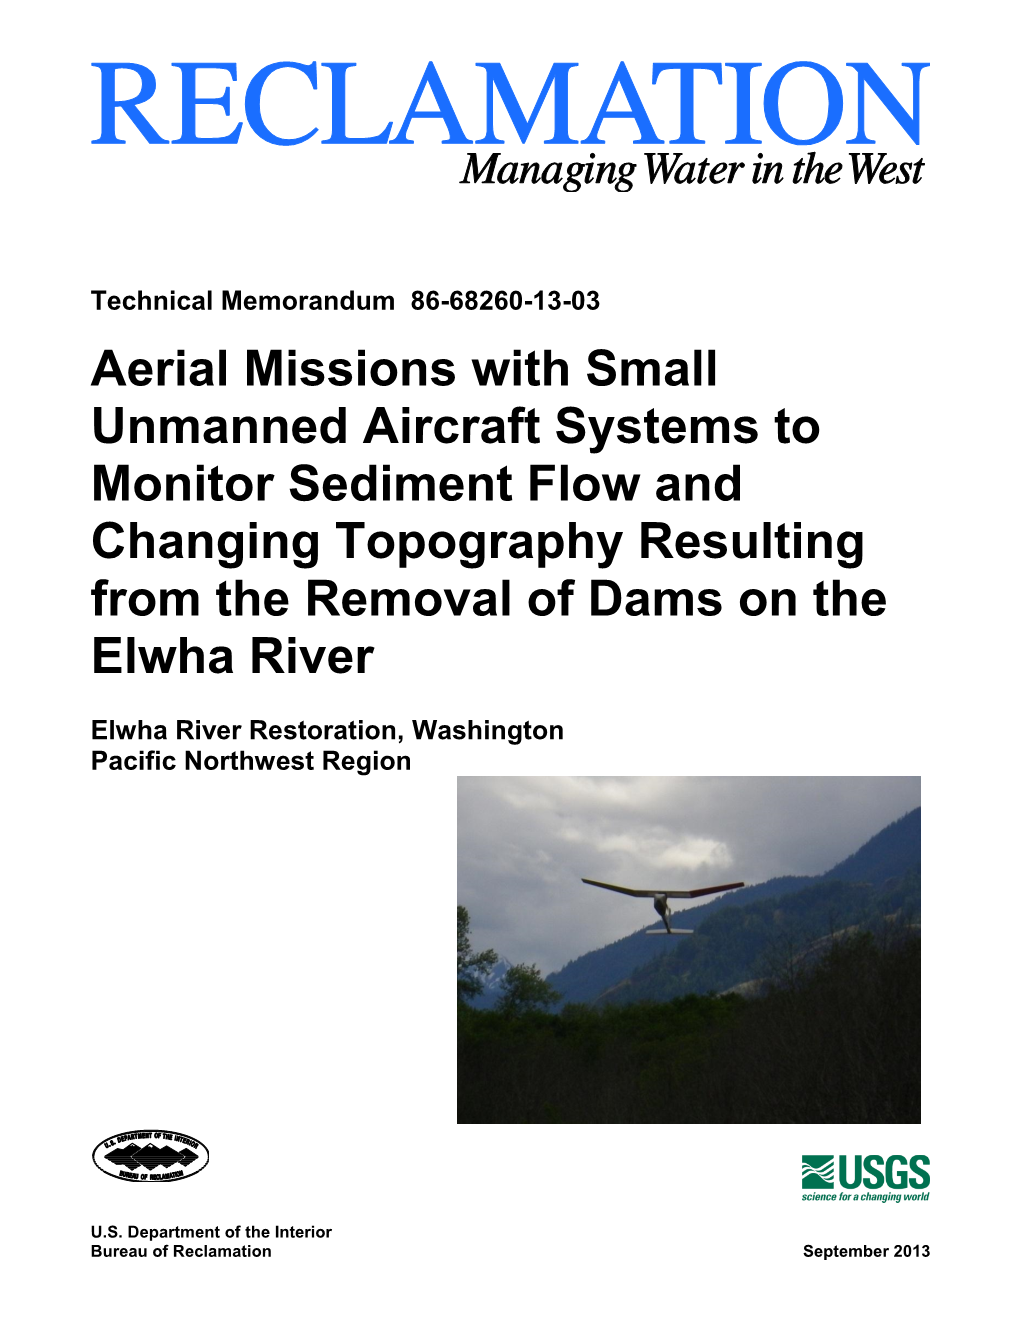 Aerial Missions with Small Unmanned Aircraft Systems to Monitor Sediment Flow and Changing Topography Resulting from the Removal of Dams on the Elwha River